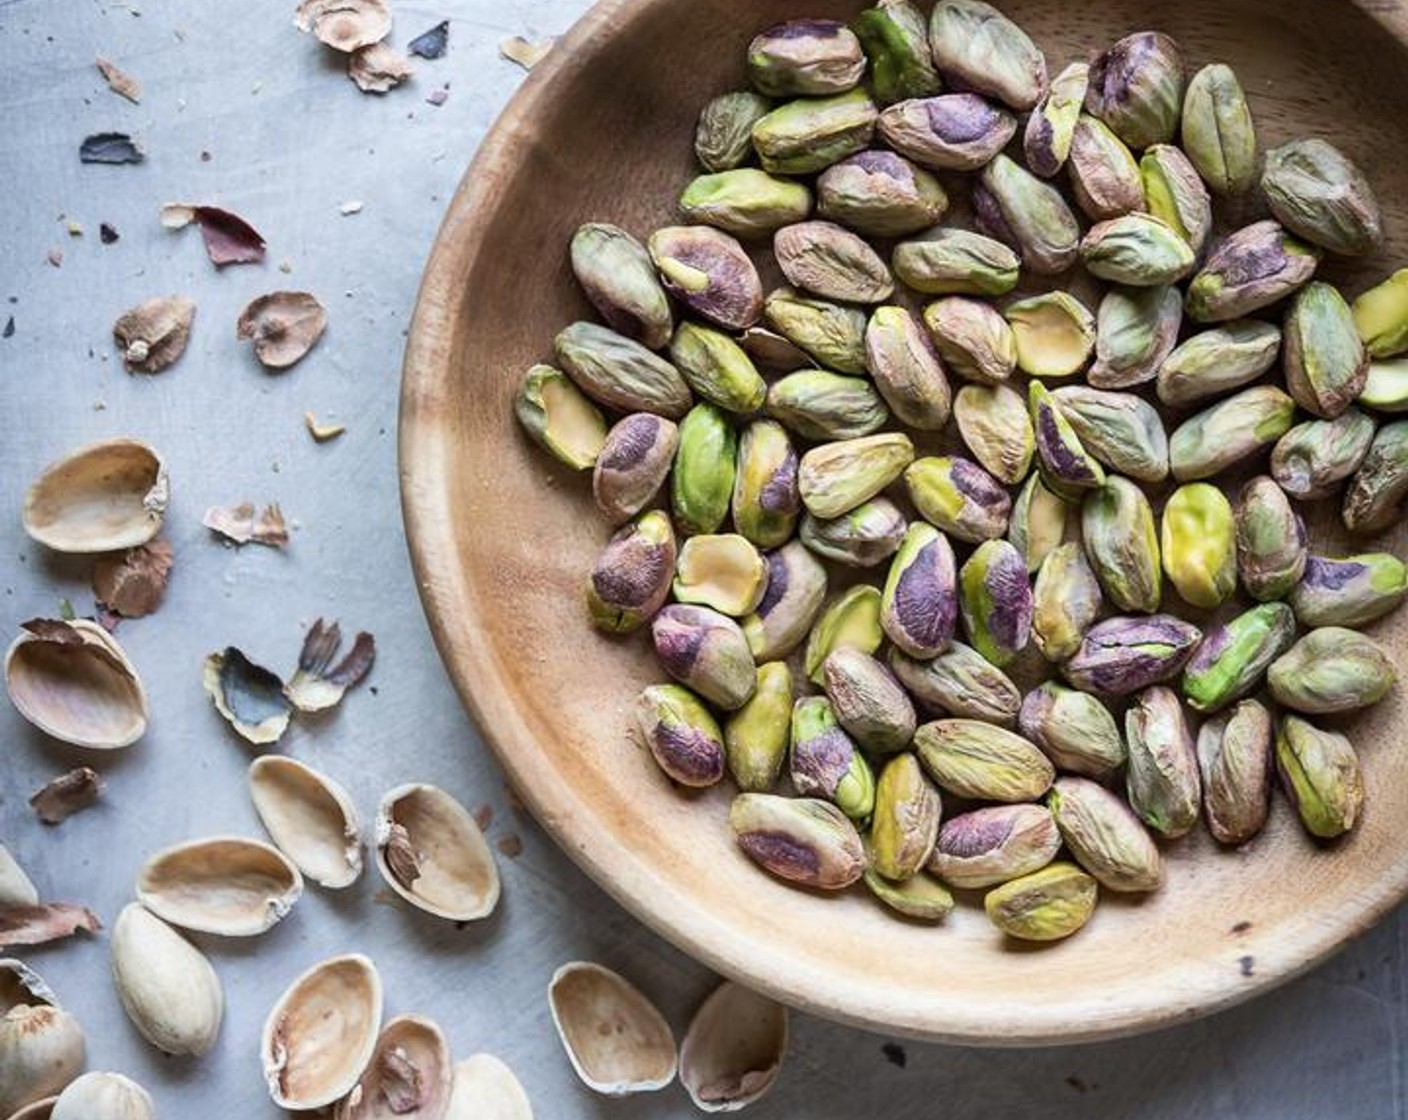 step 2 In the bowl of a food processor, pulse the Roasted Pistachios (1/4 cup) until they are in small pieces.